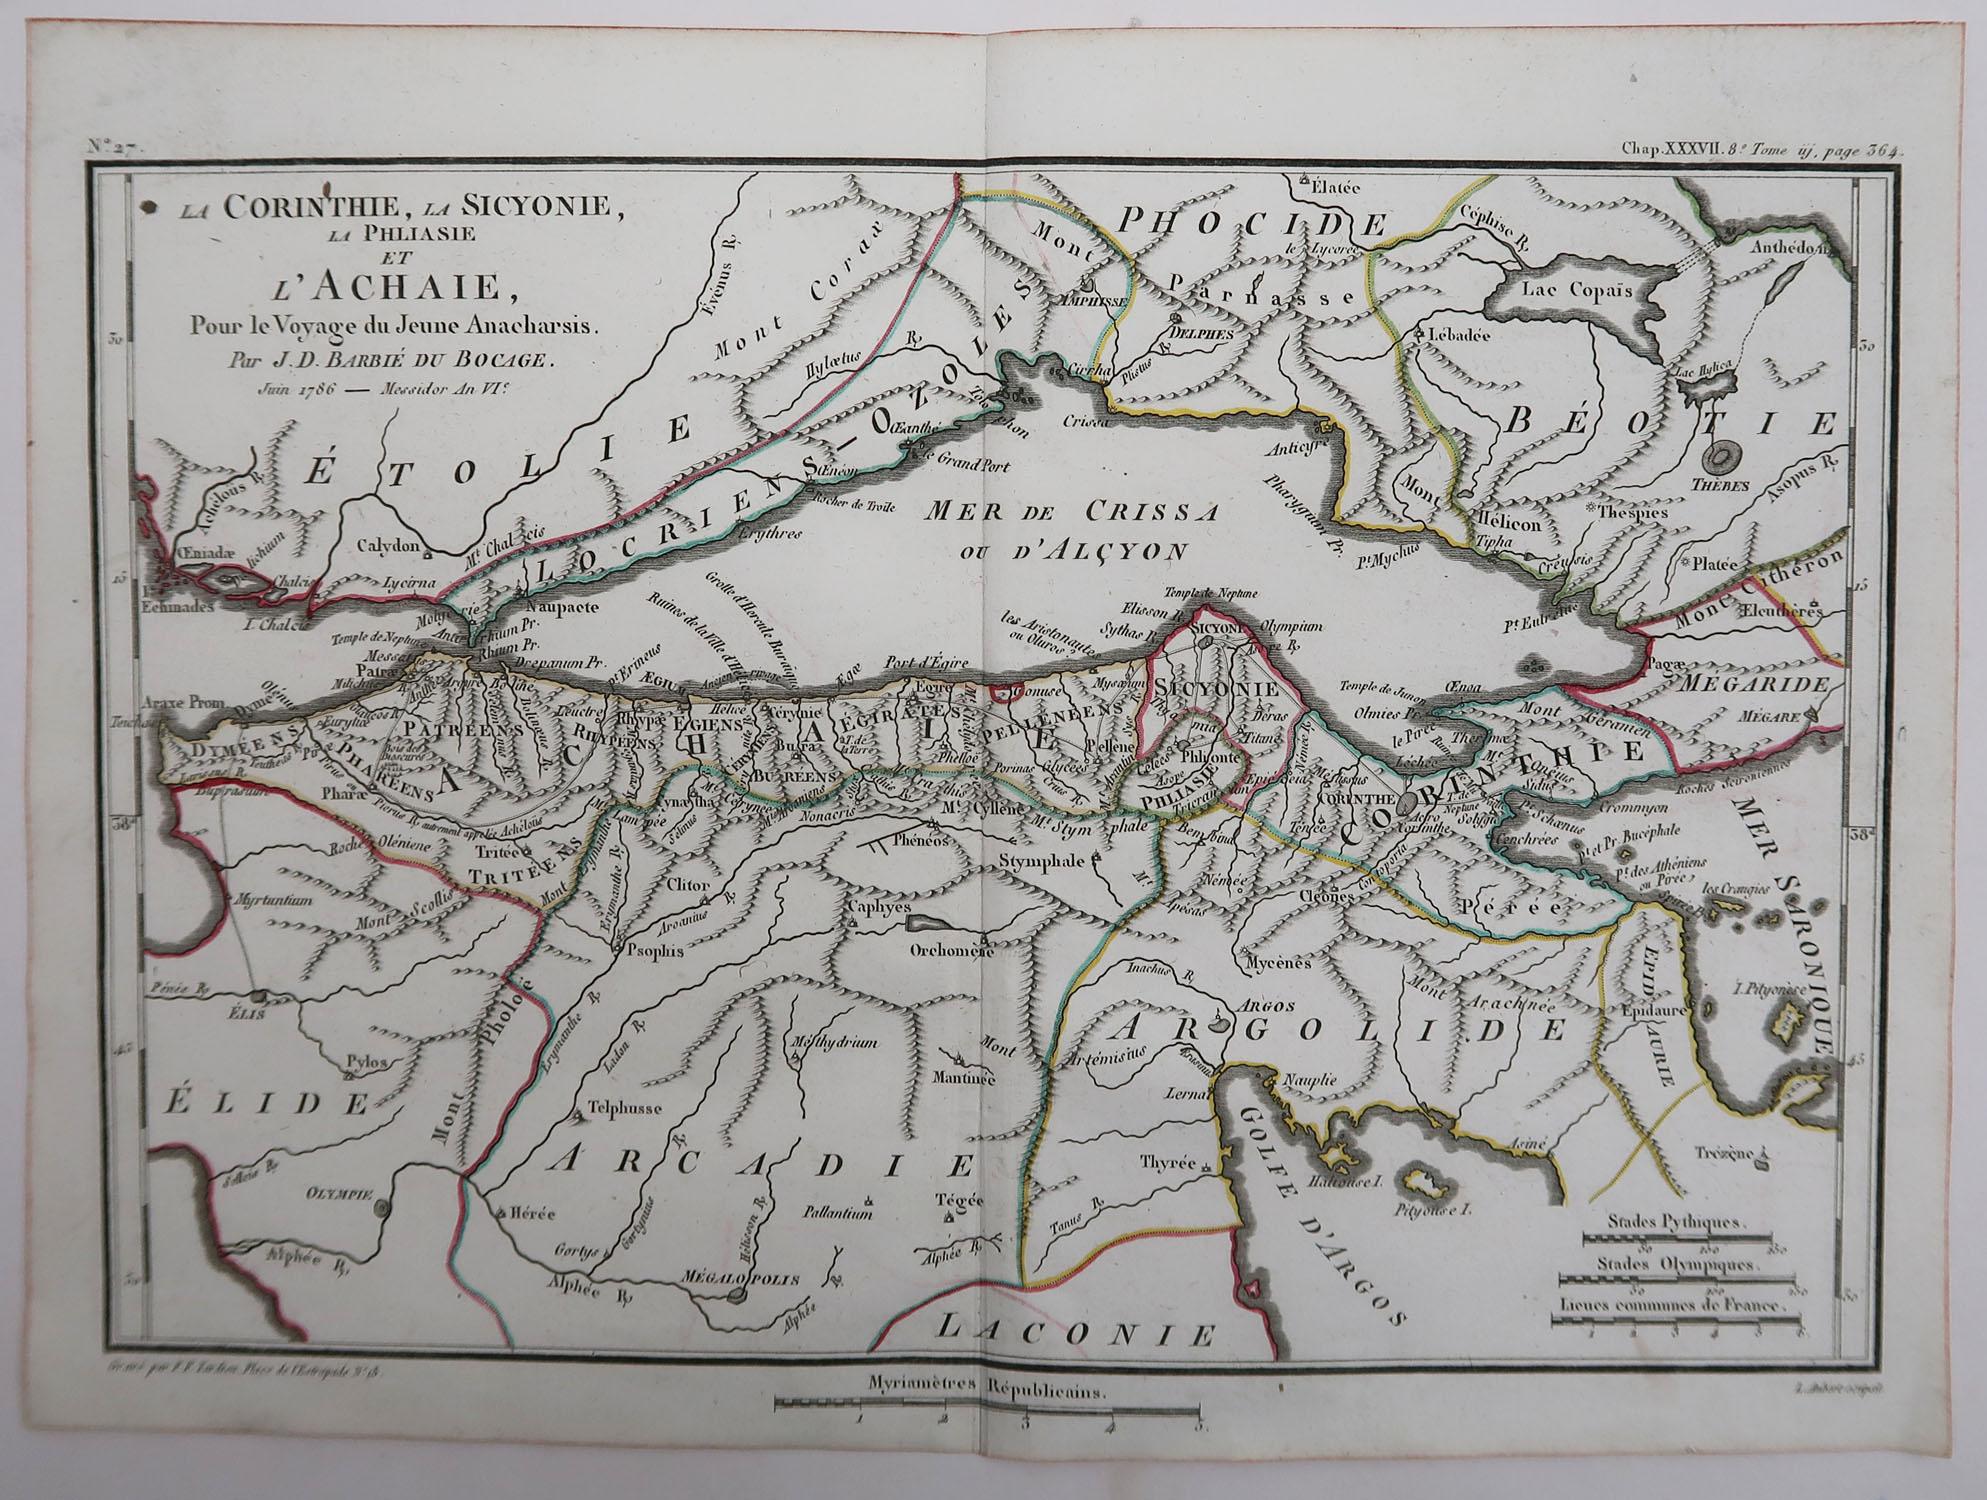 French Original Antique Map of Ancient Greece, Achaia, Corinth, 1786